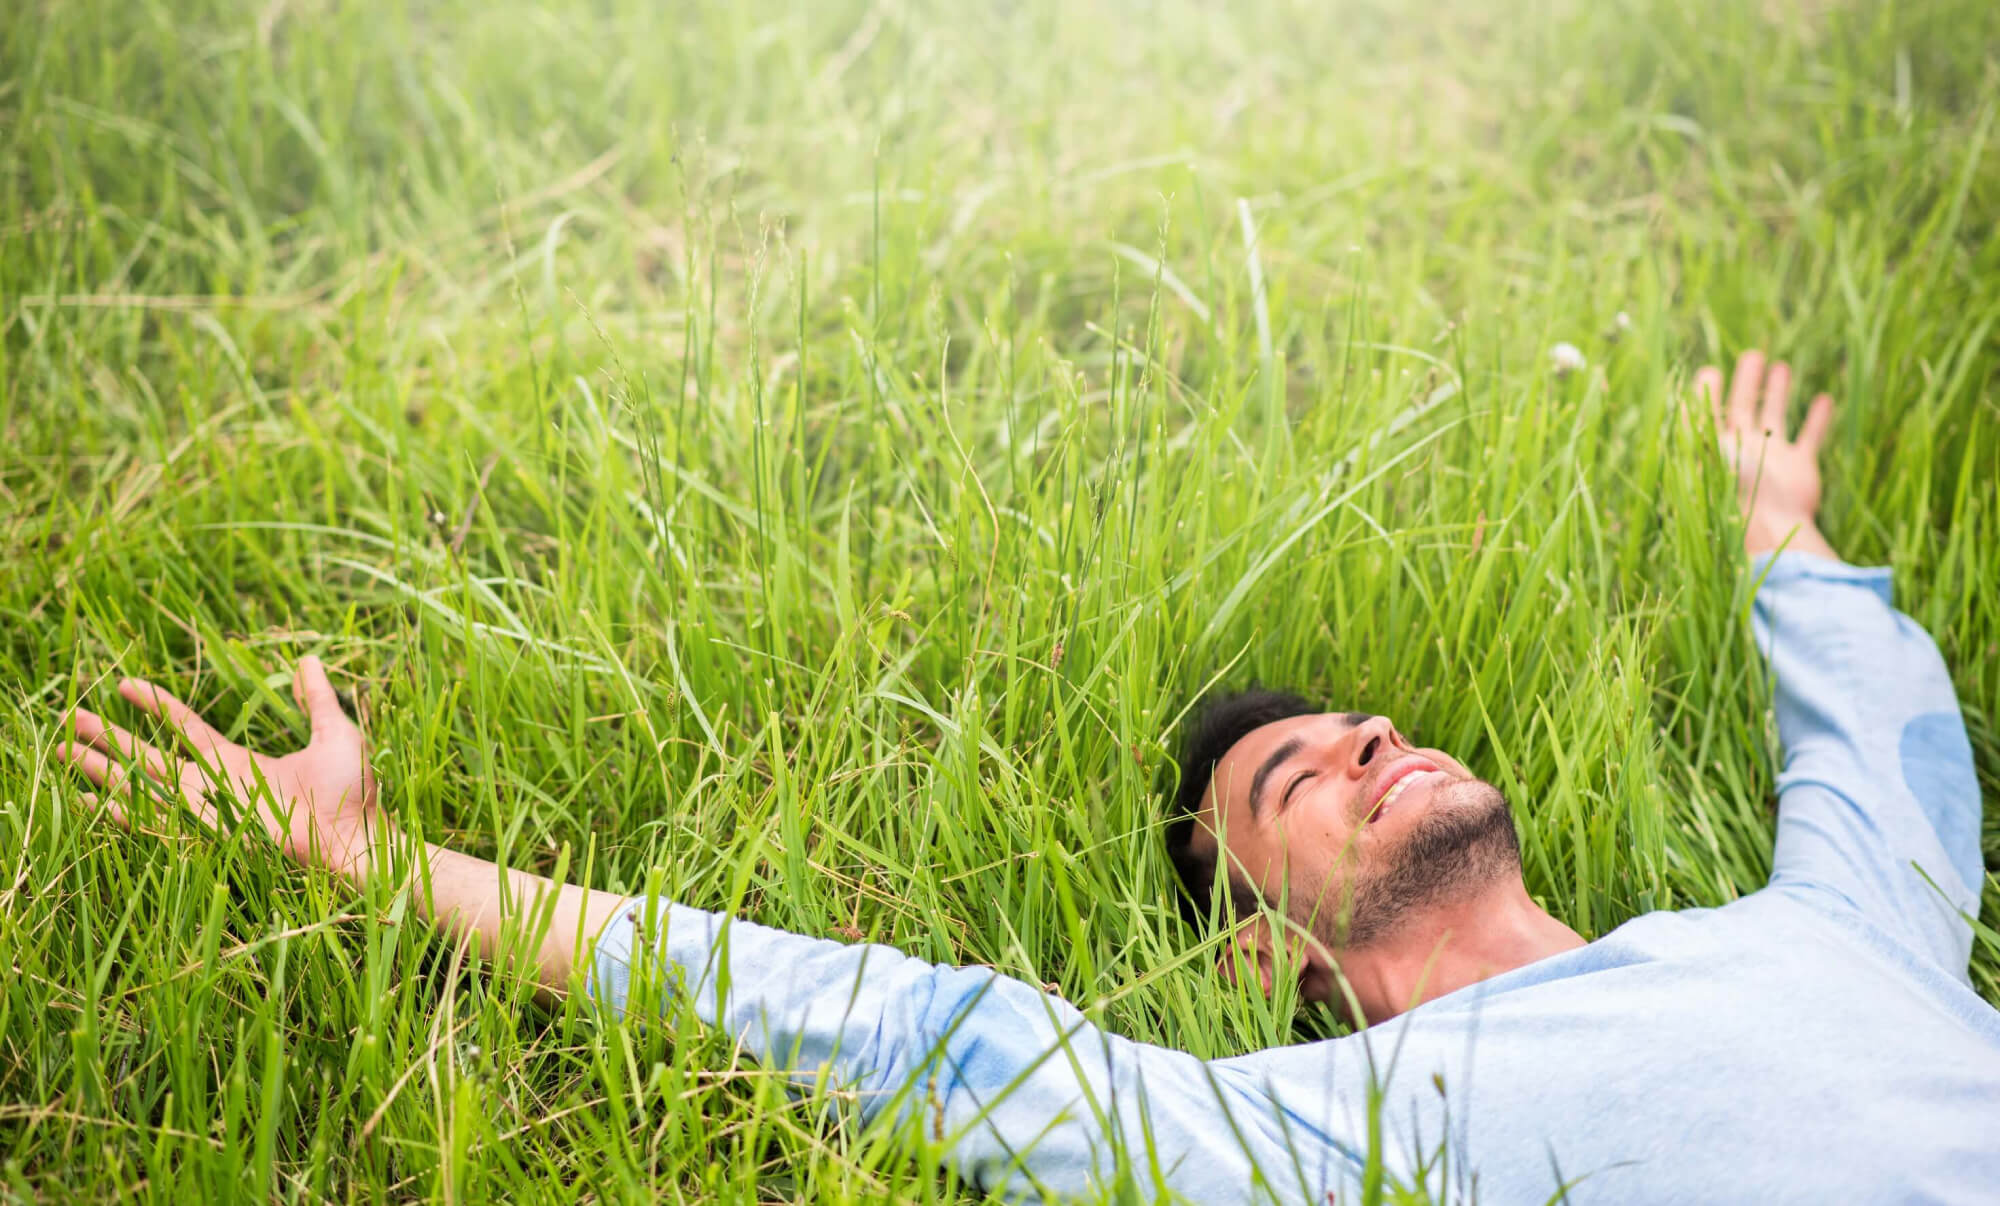 A man happily sleeping on the grass